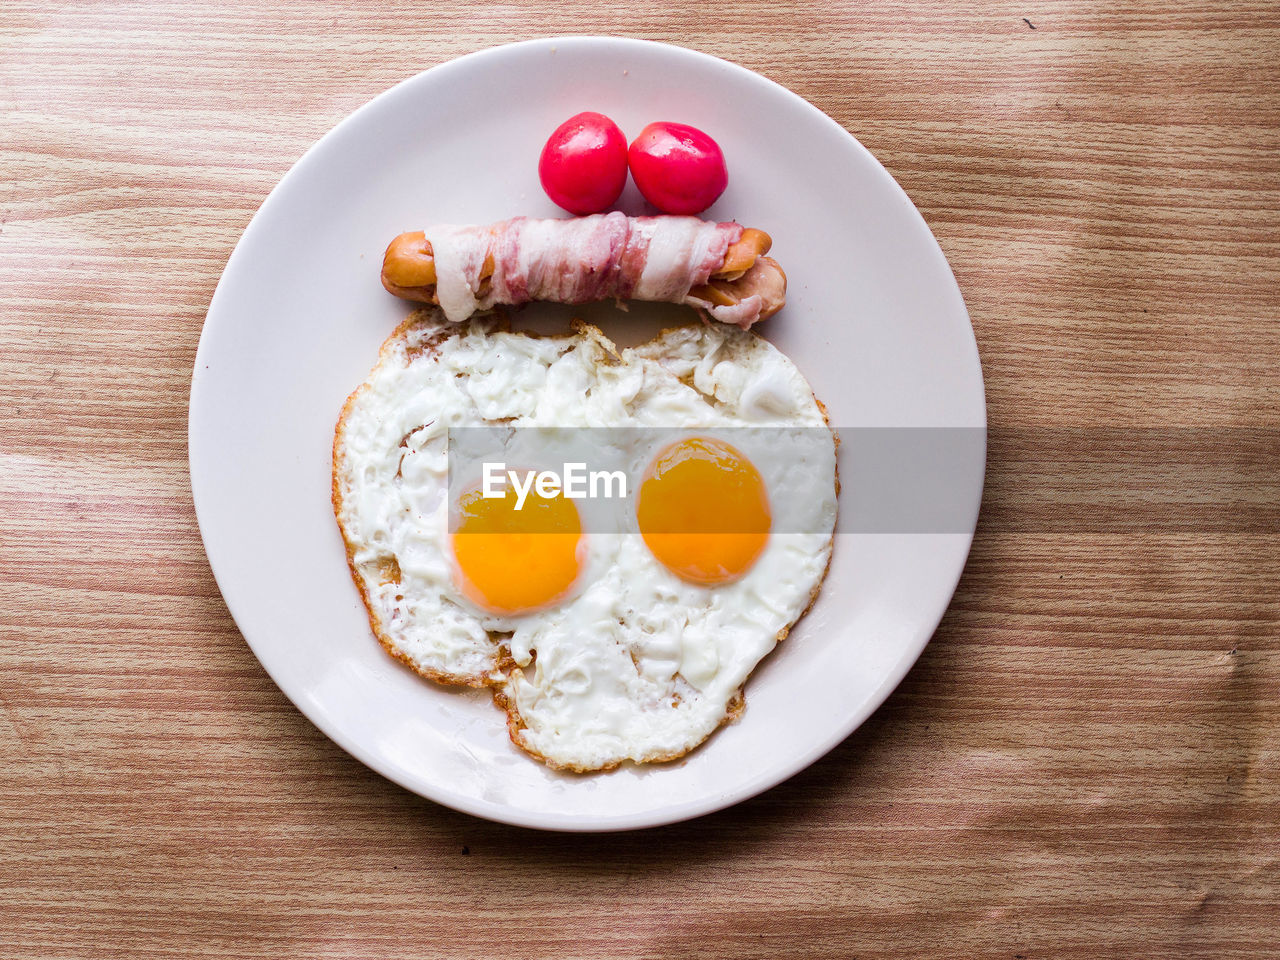 Breakfast skull fried eggs with tomato bacon and roll sausage in dish on wood table